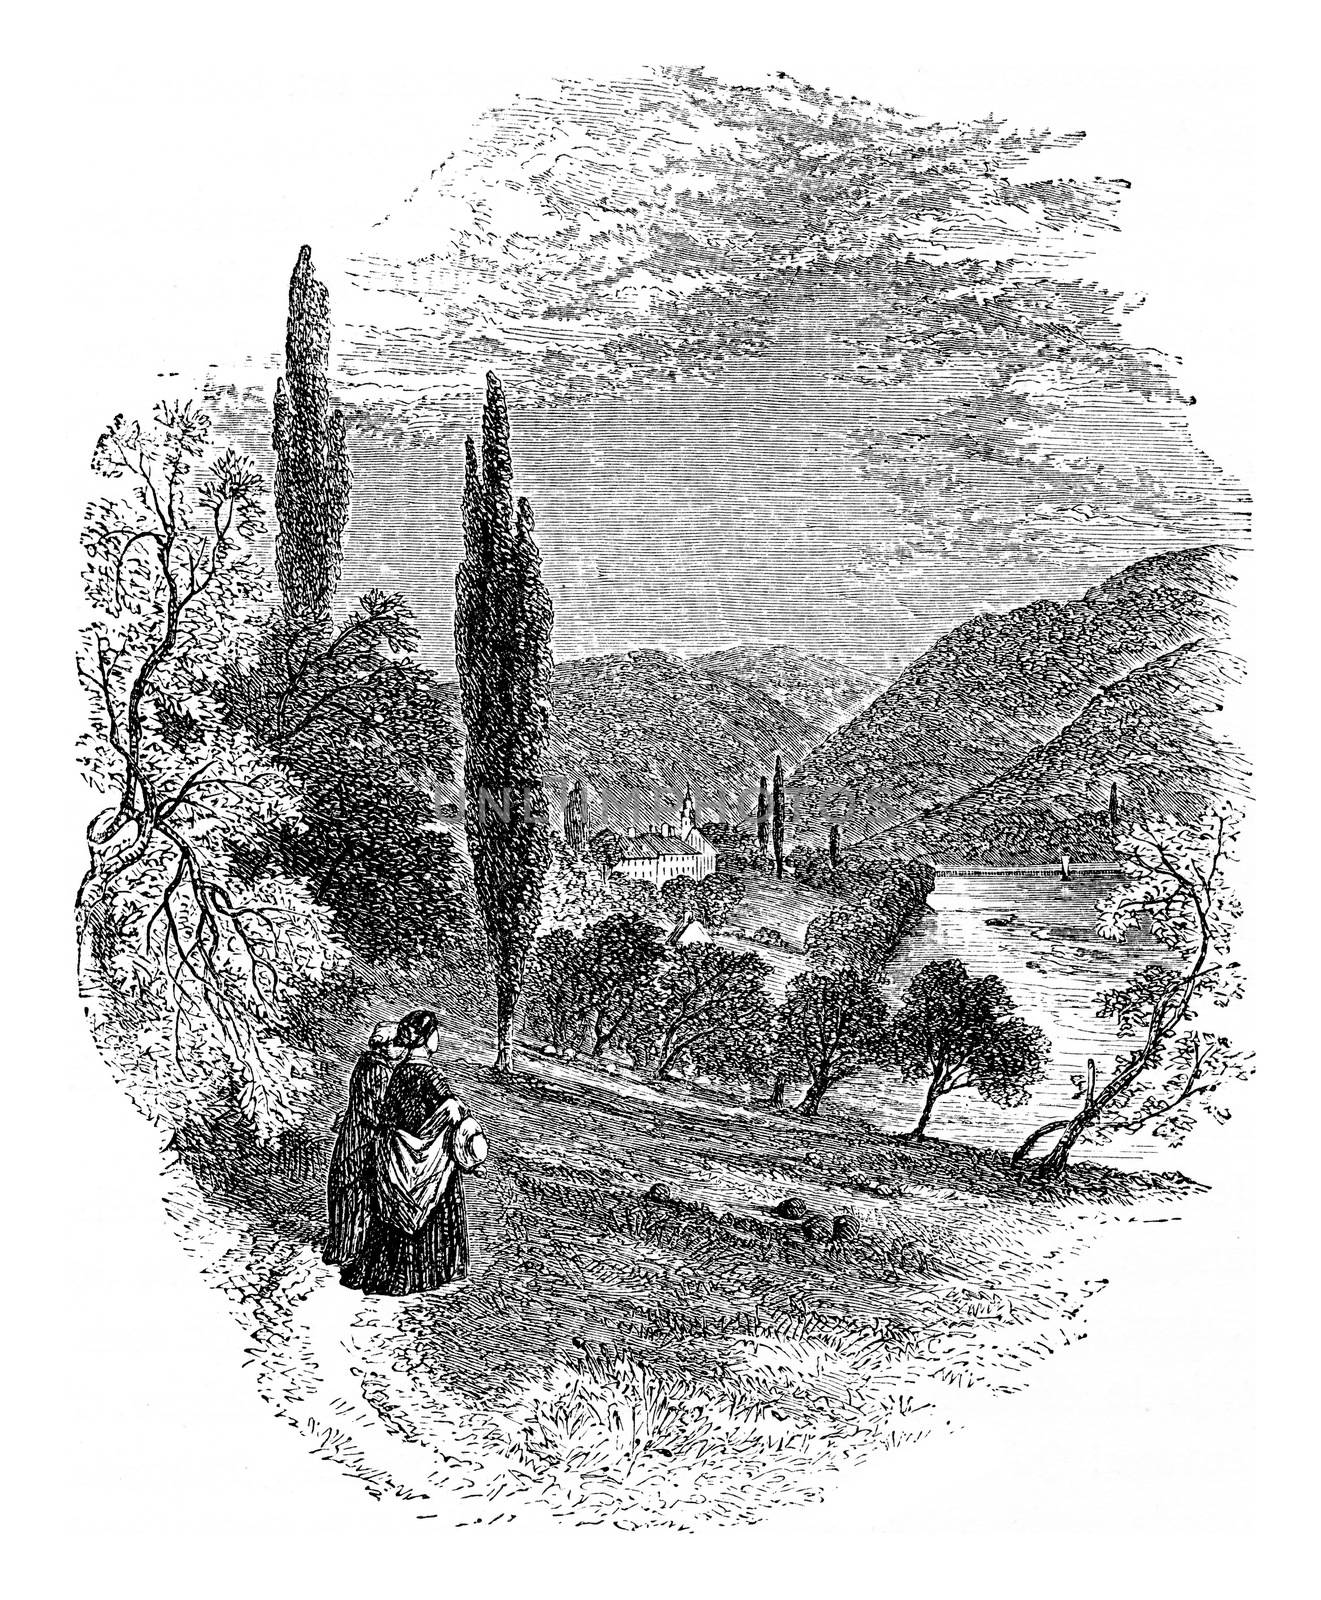 Neuburg Abbey, vintage engraved illustration. From Chemin des Ecoliers, 1861.
